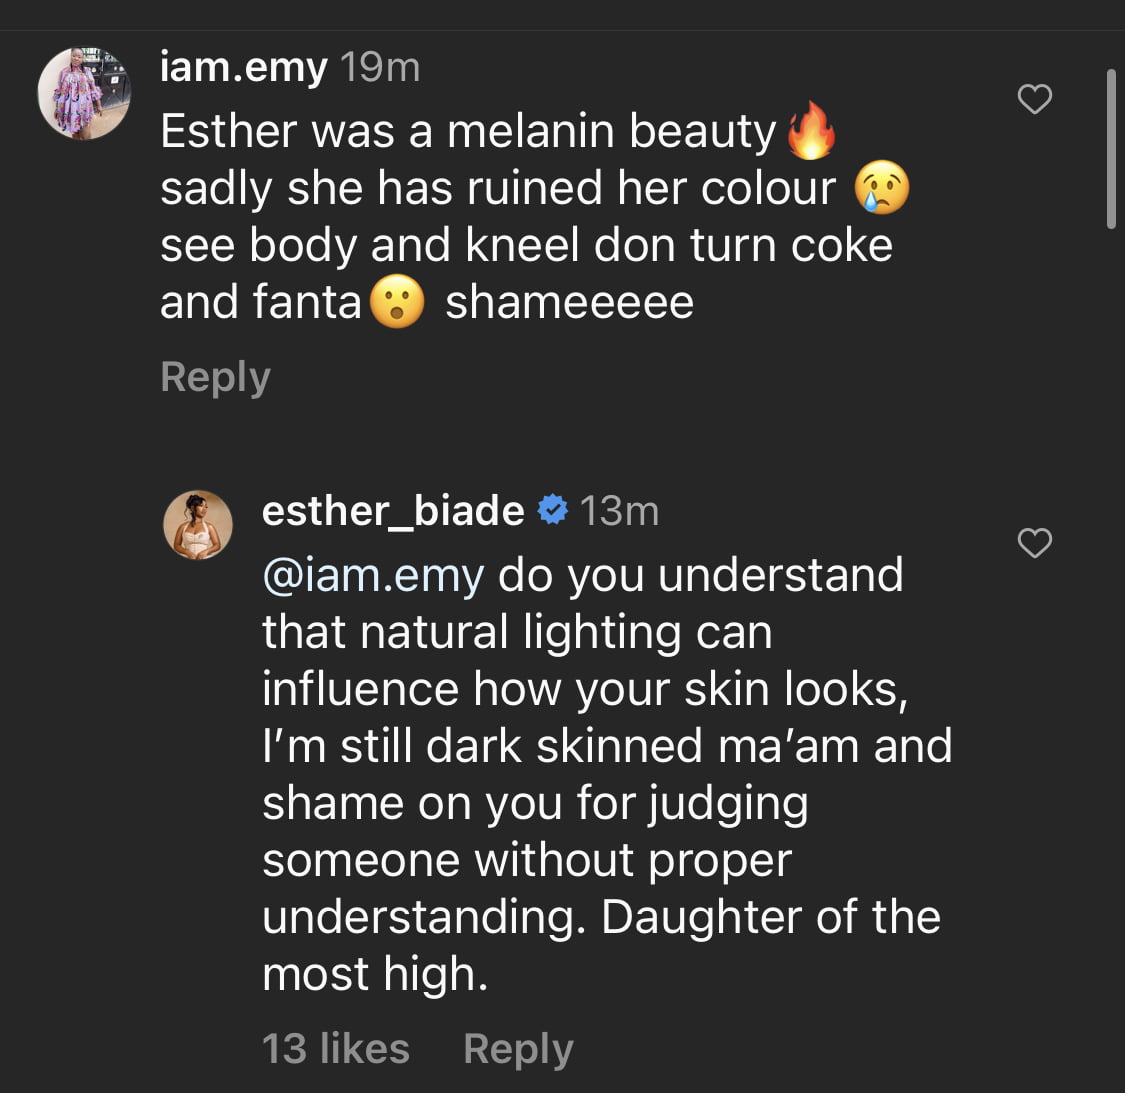 Esther Biade claps back at a netizen for accusing her of bleaching.